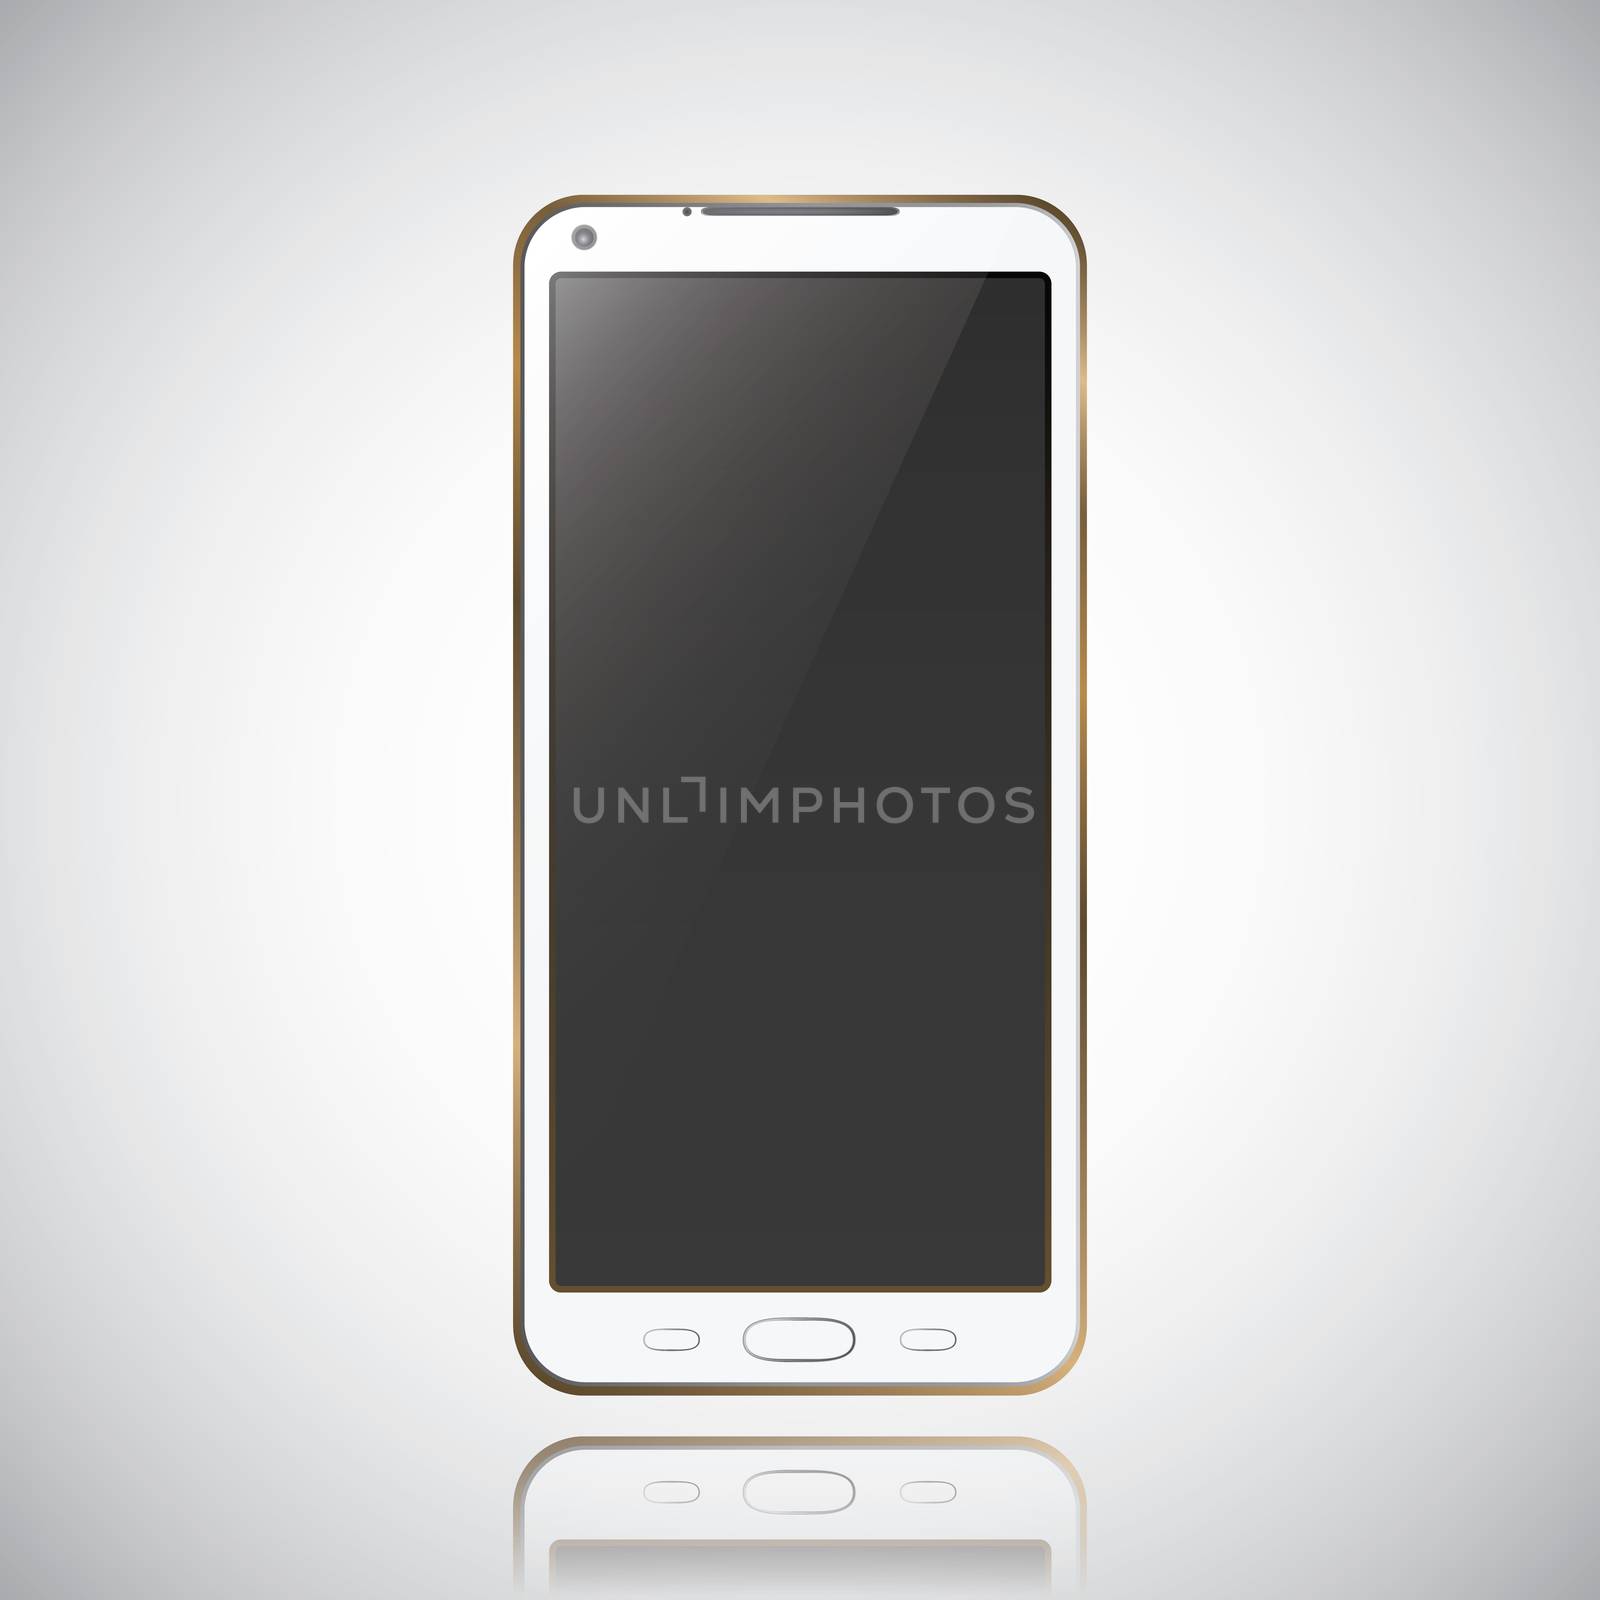 New realistic mobile phone smartphone modern style grey background with raflection.